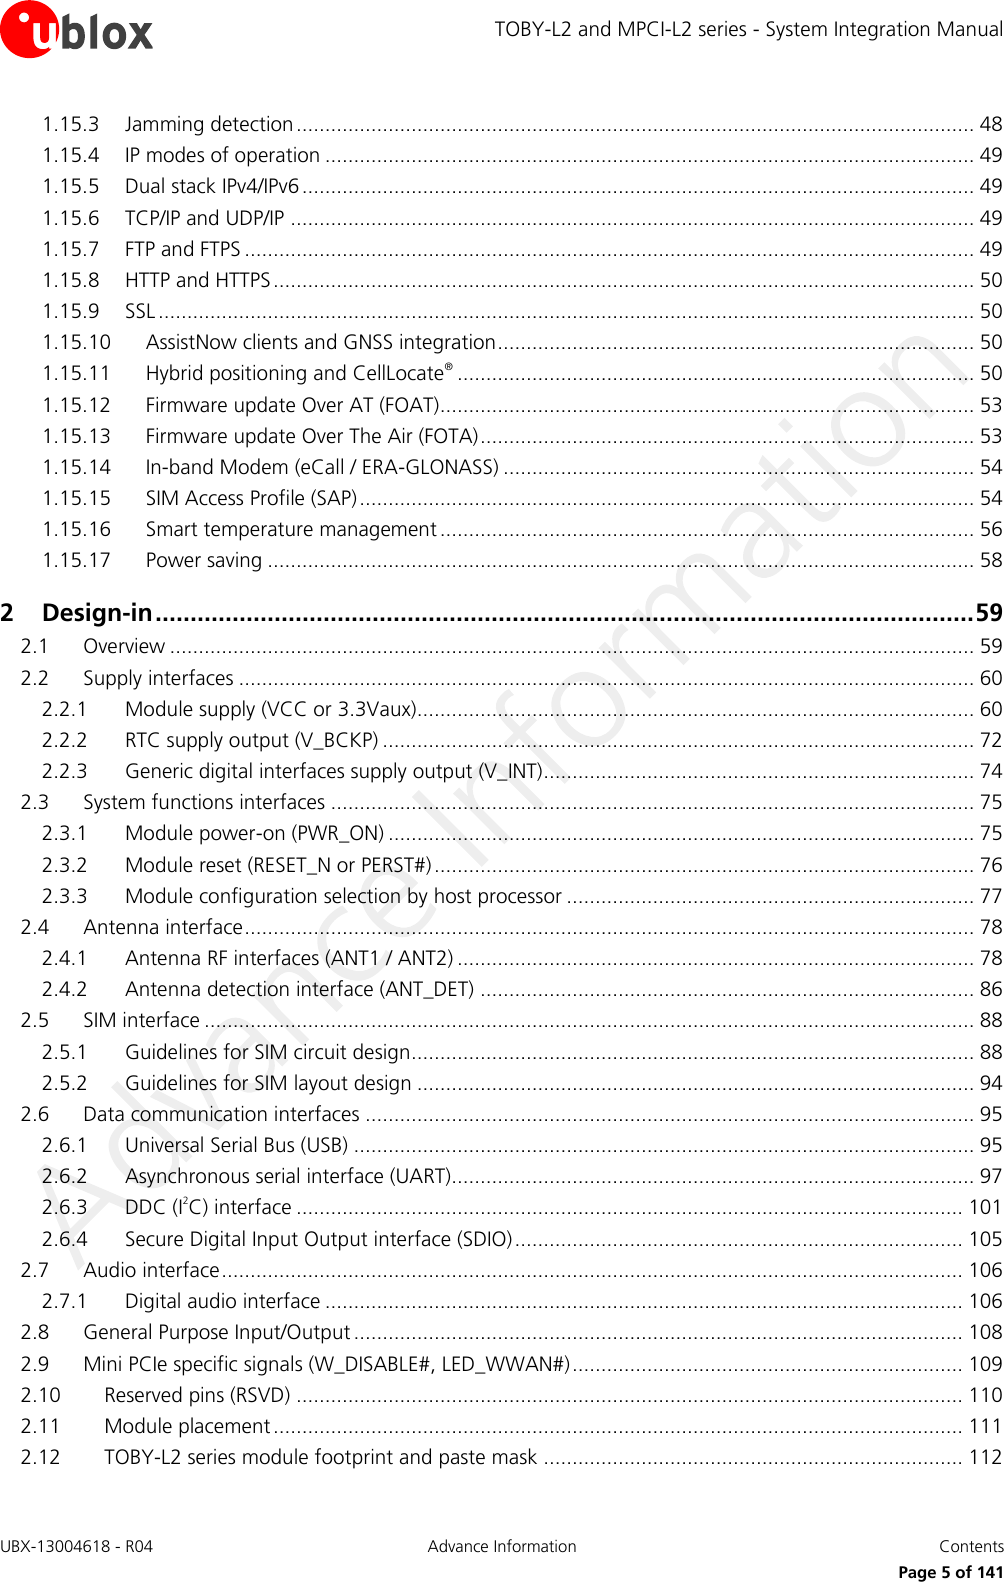 TOBY-L2 and MPCI-L2 series - System Integration Manual UBX-13004618 - R04  Advance Information  Contents     Page 5 of 141 1.15.3 Jamming detection ...................................................................................................................... 48 1.15.4 IP modes of operation ................................................................................................................. 49 1.15.5 Dual stack IPv4/IPv6 ..................................................................................................................... 49 1.15.6 TCP/IP and UDP/IP ....................................................................................................................... 49 1.15.7 FTP and FTPS ............................................................................................................................... 49 1.15.8 HTTP and HTTPS .......................................................................................................................... 50 1.15.9 SSL .............................................................................................................................................. 50 1.15.10 AssistNow clients and GNSS integration ................................................................................... 50 1.15.11 Hybrid positioning and CellLocate® .......................................................................................... 50 1.15.12 Firmware update Over AT (FOAT)............................................................................................. 53 1.15.13 Firmware update Over The Air (FOTA) ...................................................................................... 53 1.15.14 In-band Modem (eCall / ERA-GLONASS) .................................................................................. 54 1.15.15 SIM Access Profile (SAP) ........................................................................................................... 54 1.15.16 Smart temperature management ............................................................................................. 56 1.15.17 Power saving ........................................................................................................................... 58 2 Design-in ..................................................................................................................... 59 2.1 Overview ............................................................................................................................................ 59 2.2 Supply interfaces ................................................................................................................................ 60 2.2.1 Module supply (VCC or 3.3Vaux)................................................................................................. 60 2.2.2 RTC supply output (V_BCKP) ....................................................................................................... 72 2.2.3 Generic digital interfaces supply output (V_INT) ........................................................................... 74 2.3 System functions interfaces ................................................................................................................ 75 2.3.1 Module power-on (PWR_ON) ...................................................................................................... 75 2.3.2 Module reset (RESET_N or PERST#) .............................................................................................. 76 2.3.3 Module configuration selection by host processor ....................................................................... 77 2.4 Antenna interface ............................................................................................................................... 78 2.4.1 Antenna RF interfaces (ANT1 / ANT2) .......................................................................................... 78 2.4.2 Antenna detection interface (ANT_DET) ...................................................................................... 86 2.5 SIM interface ...................................................................................................................................... 88 2.5.1 Guidelines for SIM circuit design.................................................................................................. 88 2.5.2 Guidelines for SIM layout design ................................................................................................. 94 2.6 Data communication interfaces .......................................................................................................... 95 2.6.1 Universal Serial Bus (USB) ............................................................................................................ 95 2.6.2 Asynchronous serial interface (UART)........................................................................................... 97 2.6.3 DDC (I2C) interface .................................................................................................................... 101 2.6.4 Secure Digital Input Output interface (SDIO) .............................................................................. 105 2.7 Audio interface ................................................................................................................................. 106 2.7.1 Digital audio interface ............................................................................................................... 106 2.8 General Purpose Input/Output .......................................................................................................... 108 2.9 Mini PCIe specific signals (W_DISABLE#, LED_WWAN#) .................................................................... 109 2.10 Reserved pins (RSVD) .................................................................................................................... 110 2.11 Module placement ........................................................................................................................ 111 2.12 TOBY-L2 series module footprint and paste mask ......................................................................... 112 